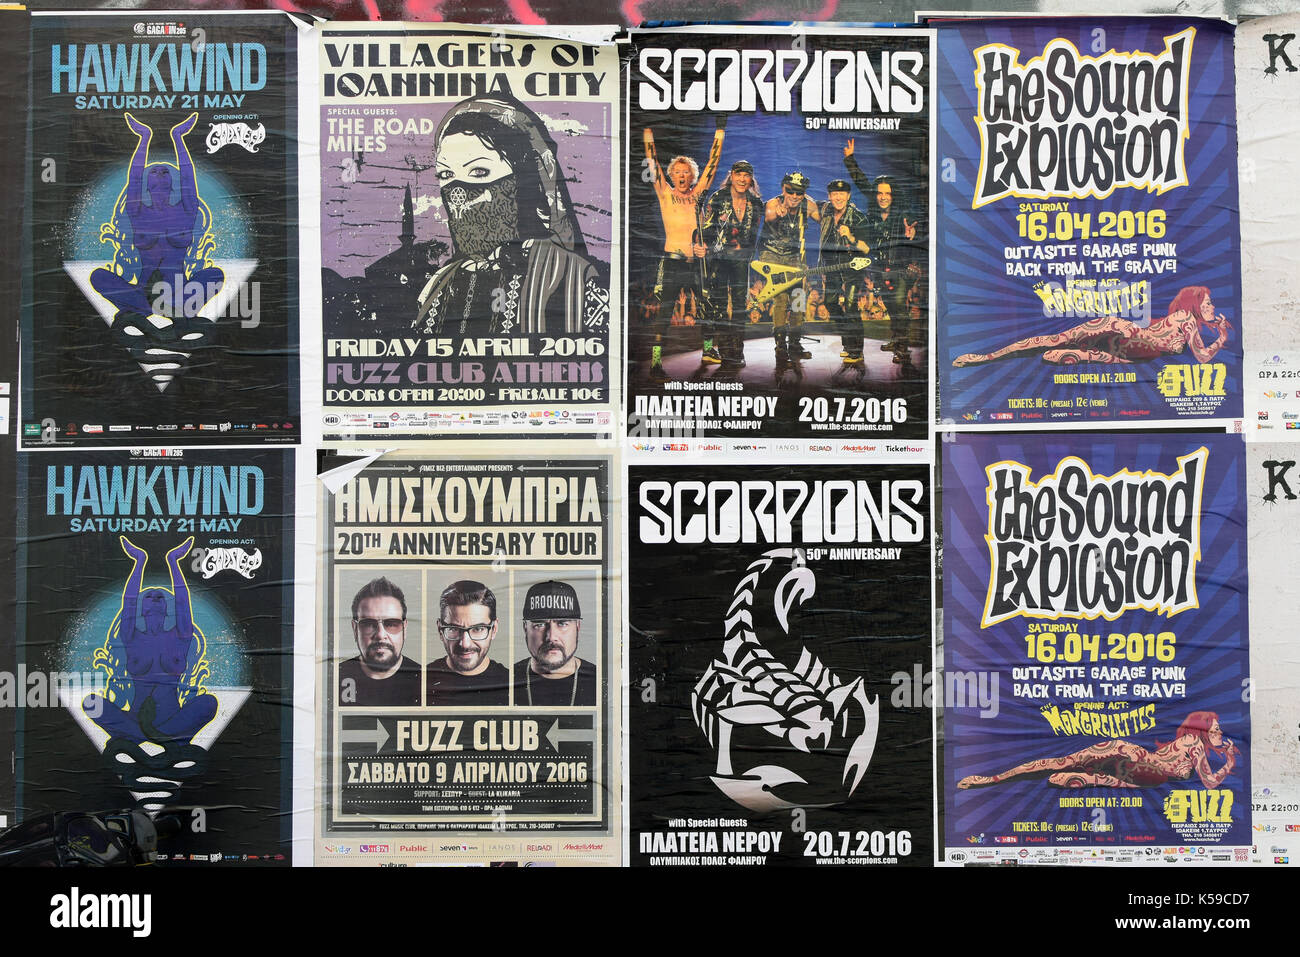 ATHENS, GREECE - APRIL 9, 2016: Concert posters for live music by Hawkwind, Scorpions, Villagers of Ioannina City, The Sound Explosion and Imiskoubria Stock Photo